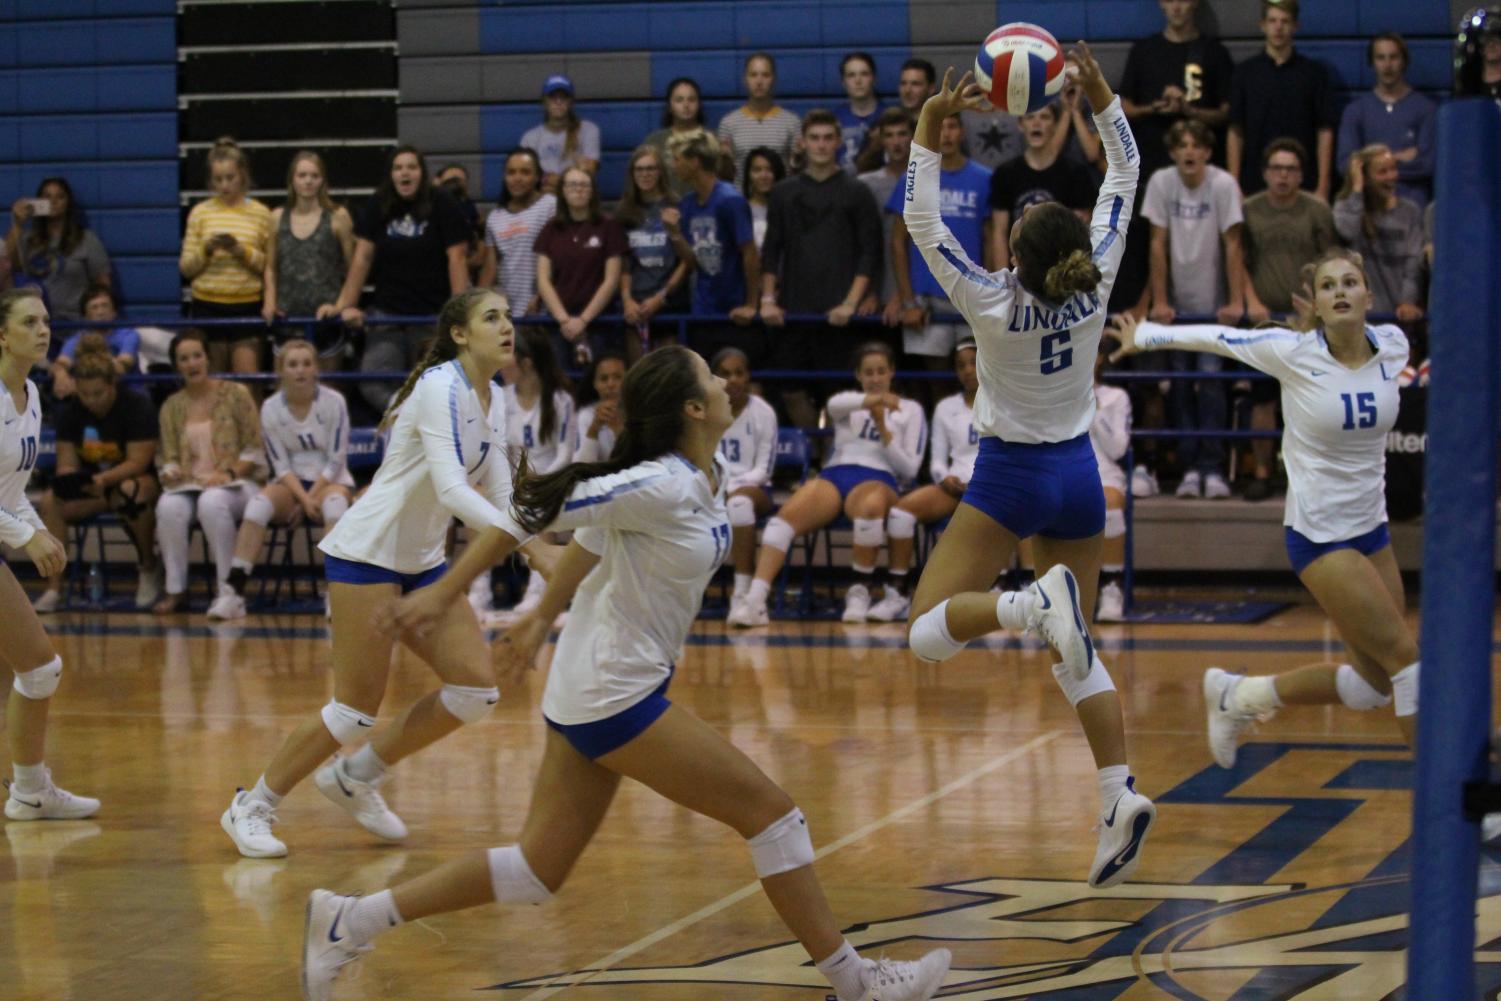 Junior Harleigh Thurman sets the ball as sophomore Shelbi Steen, junior London Reue and senior Brina Kuslak get ready to spike the ball over the net. The Lady Eagles won the Tyler tournament with an undefeated record of 6-0.